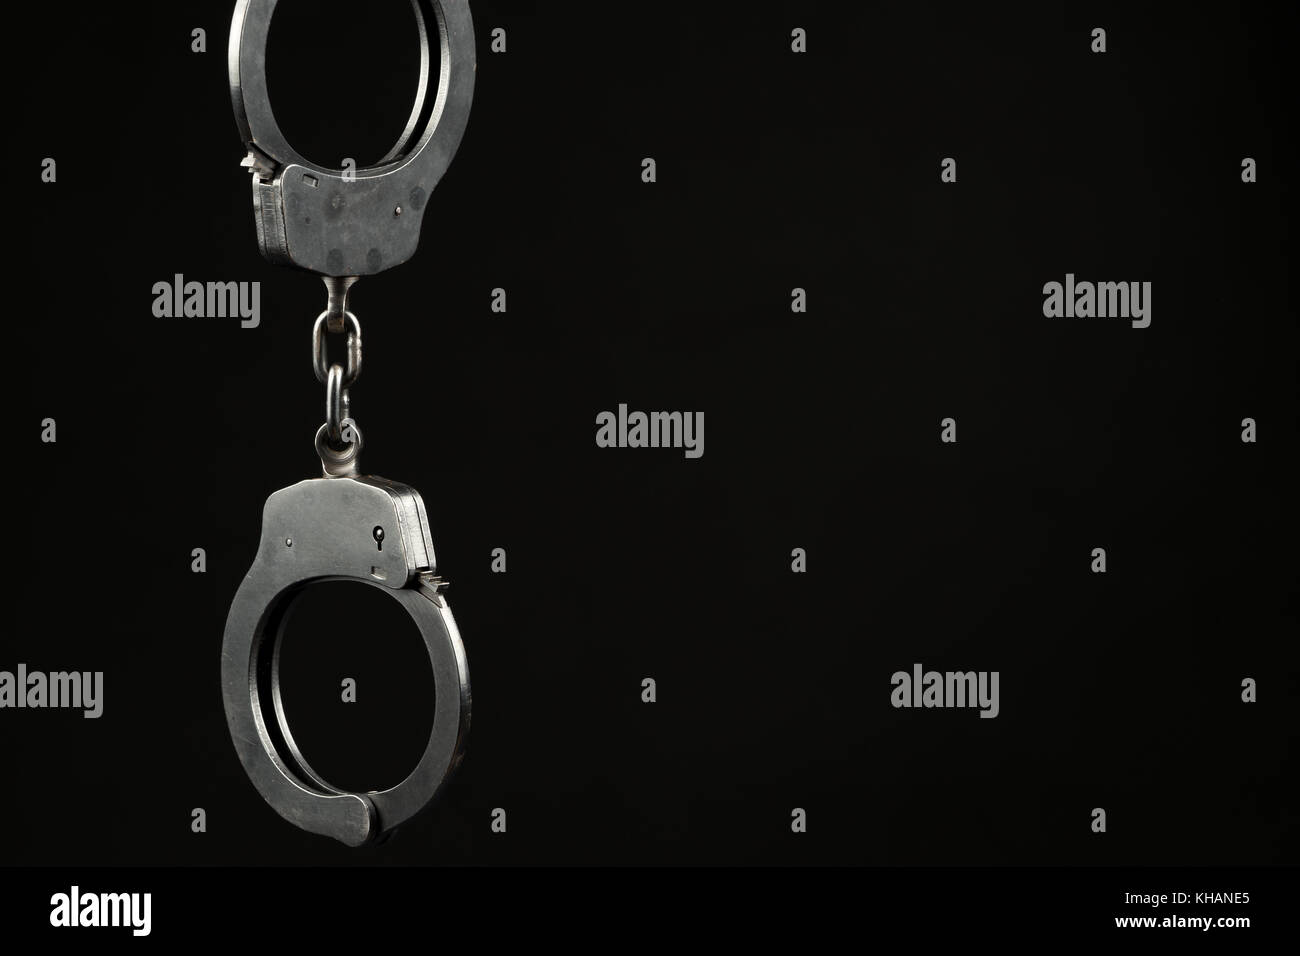 Locked police handcuffs on a black background with text / writing space. Crime / security concept. Stock Photo